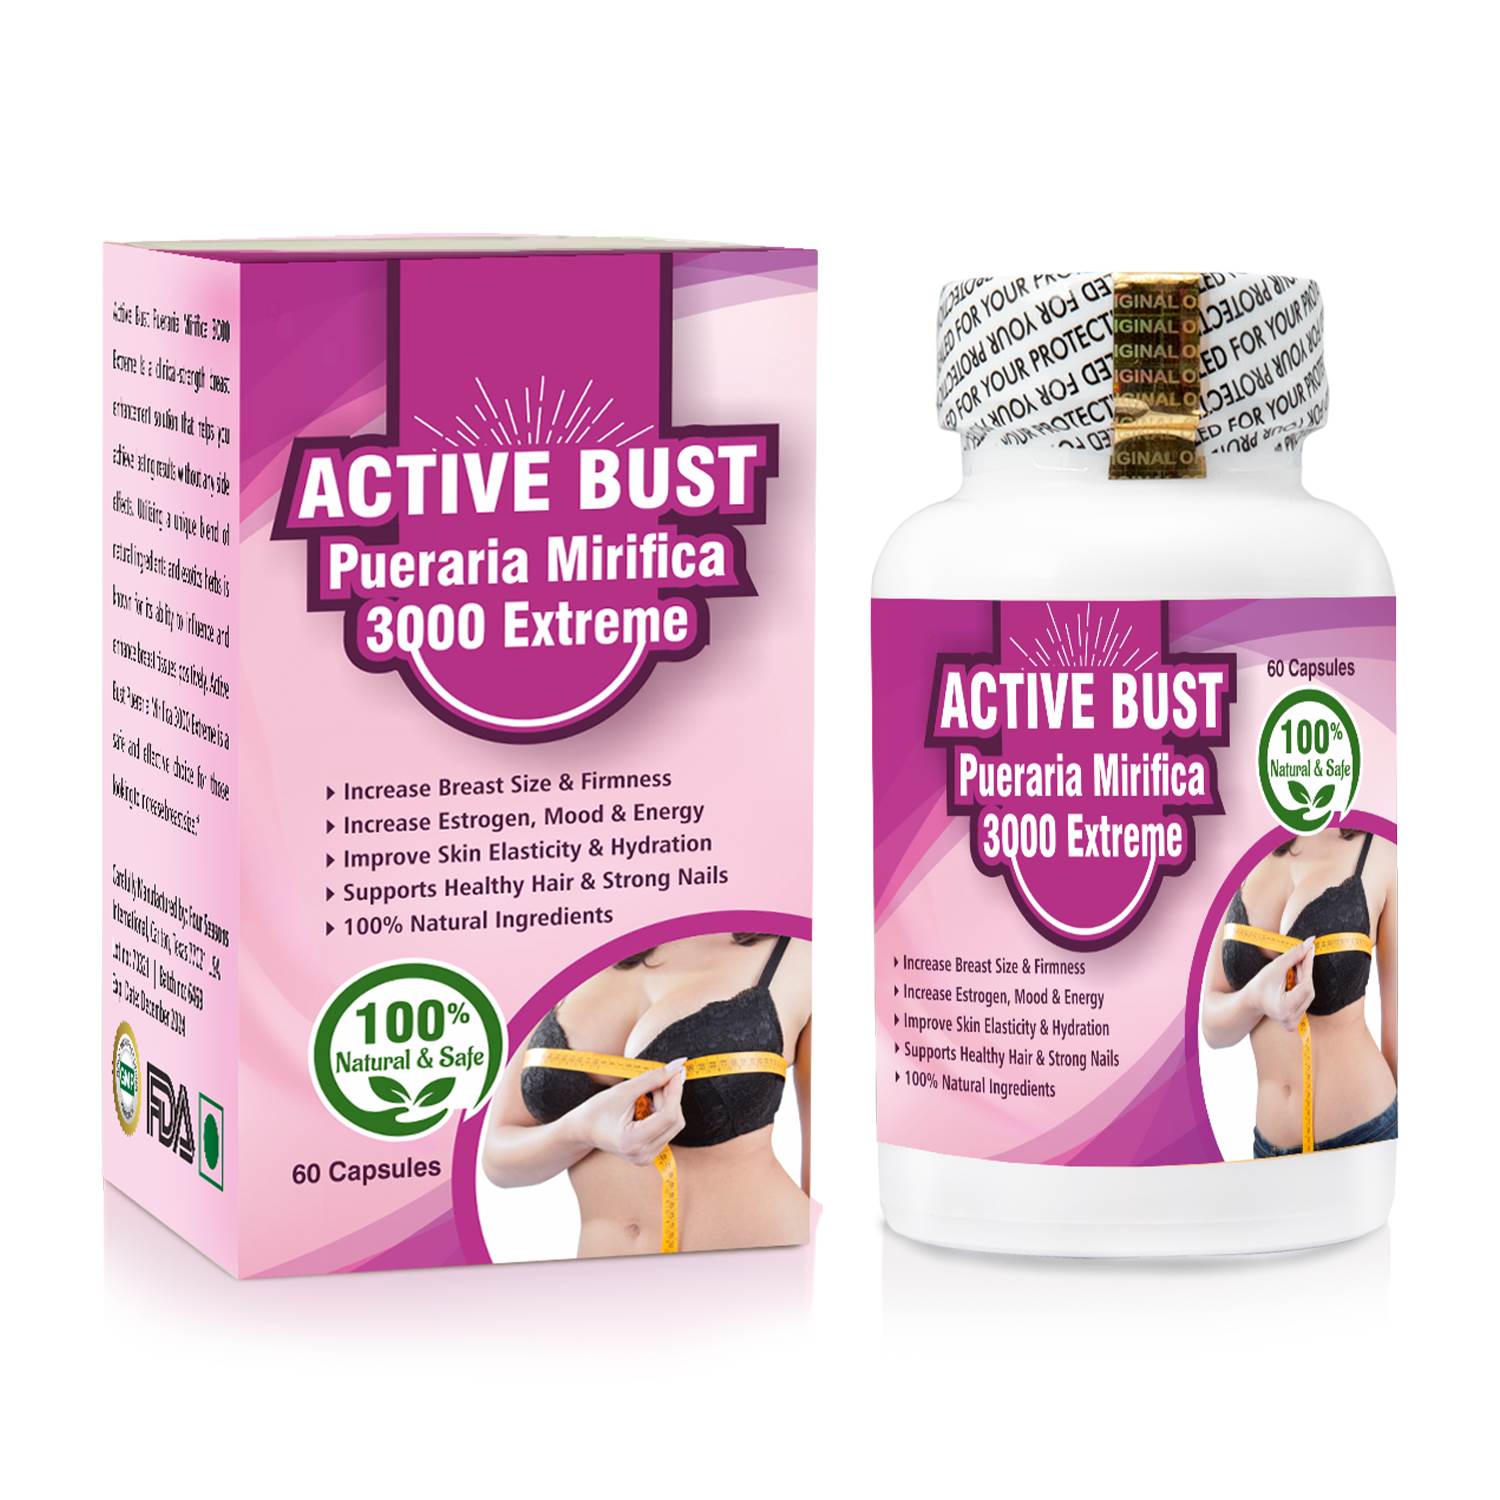 Active Bust Pueraria Mirifica 3000 extreme reviews